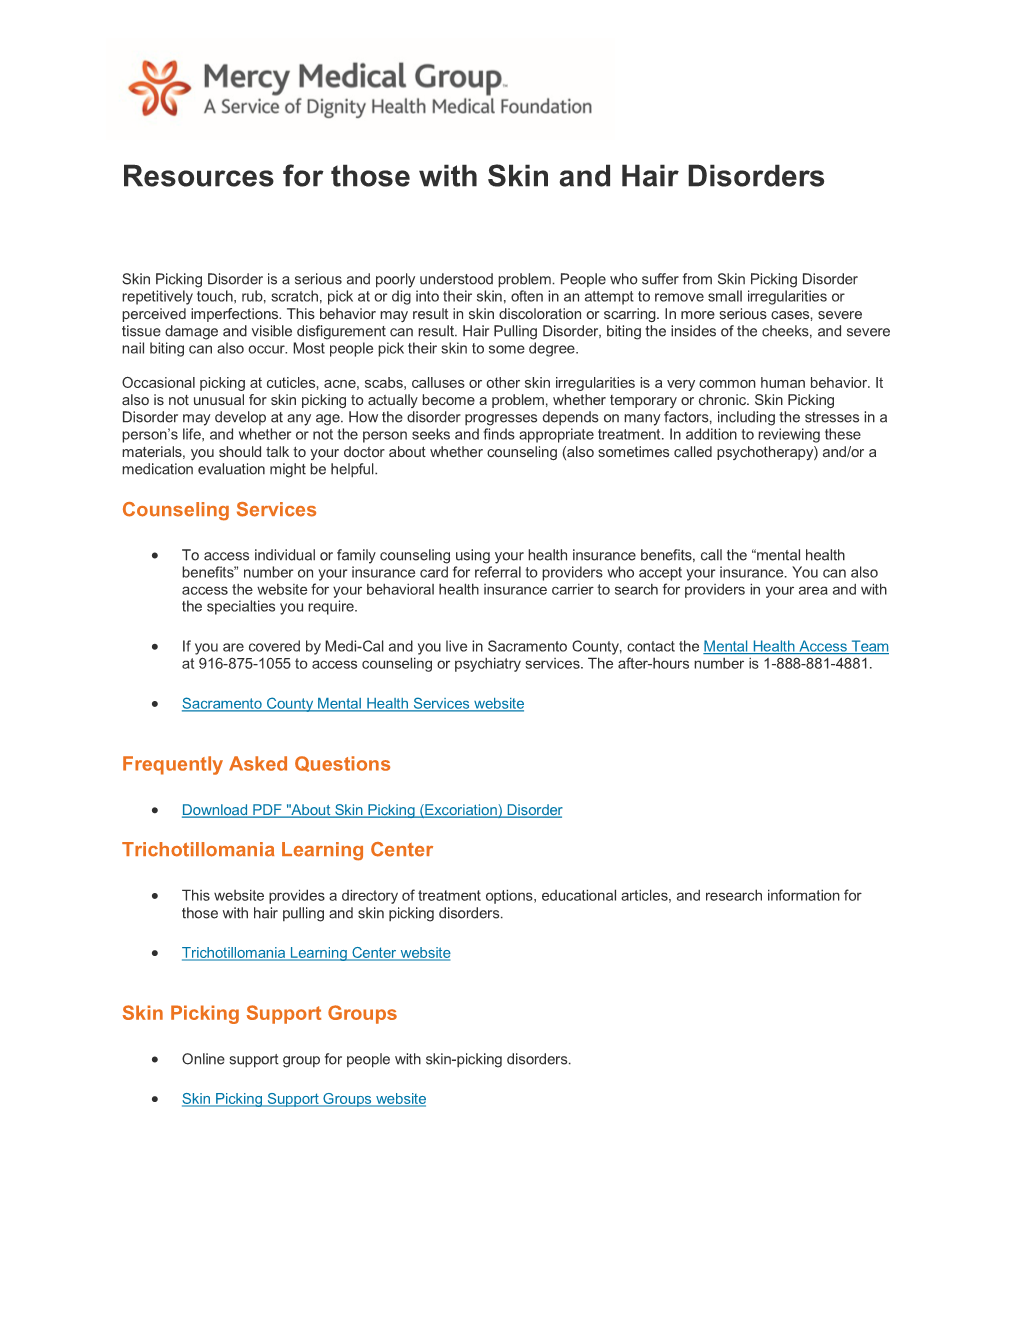 Resources for Those with Skin and Hair Disorders